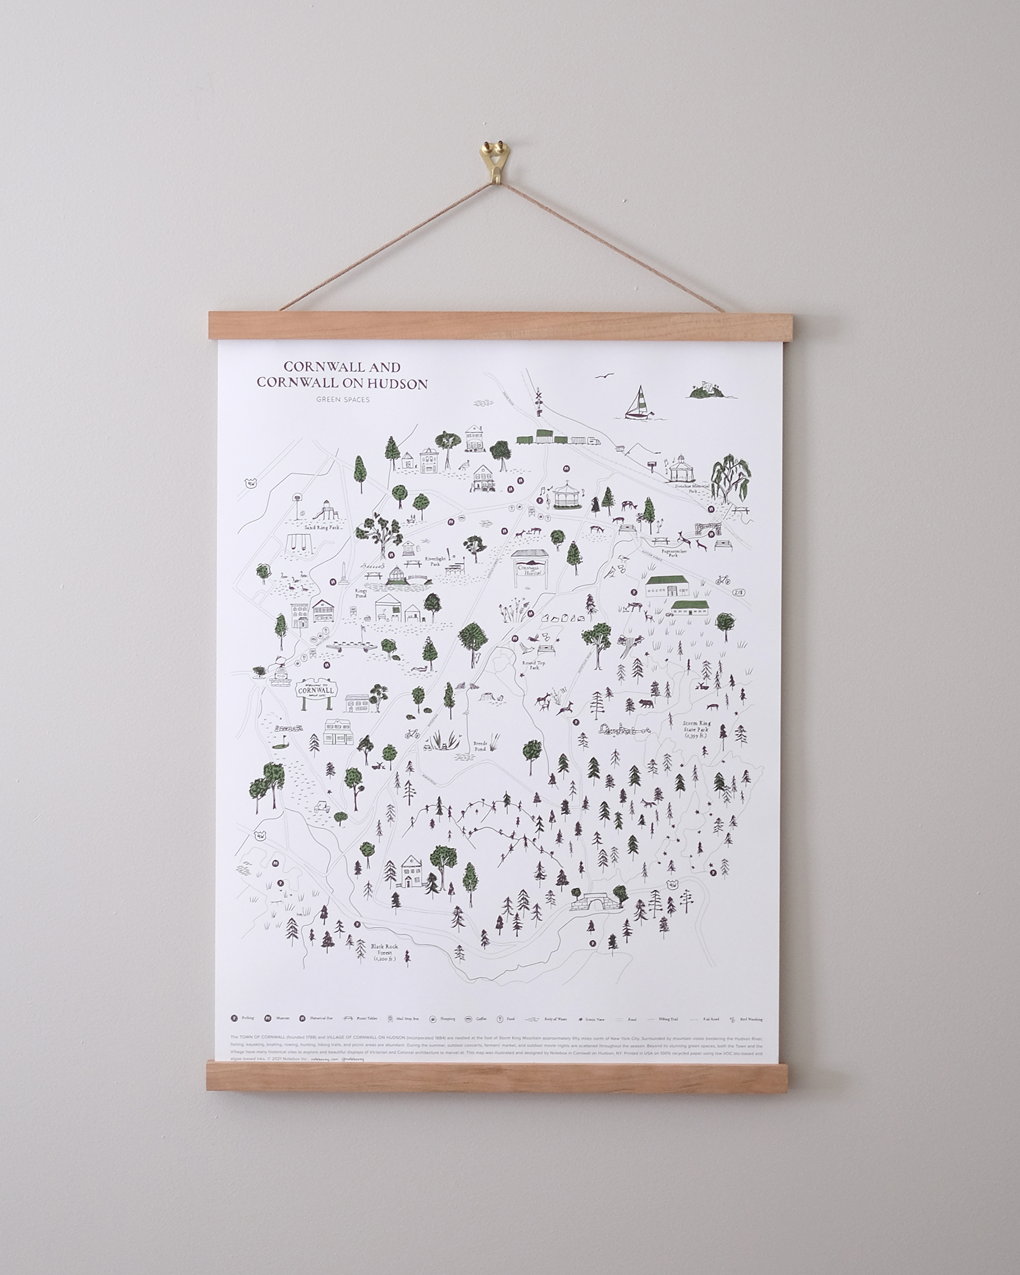 Cornwall Green Spaces Map